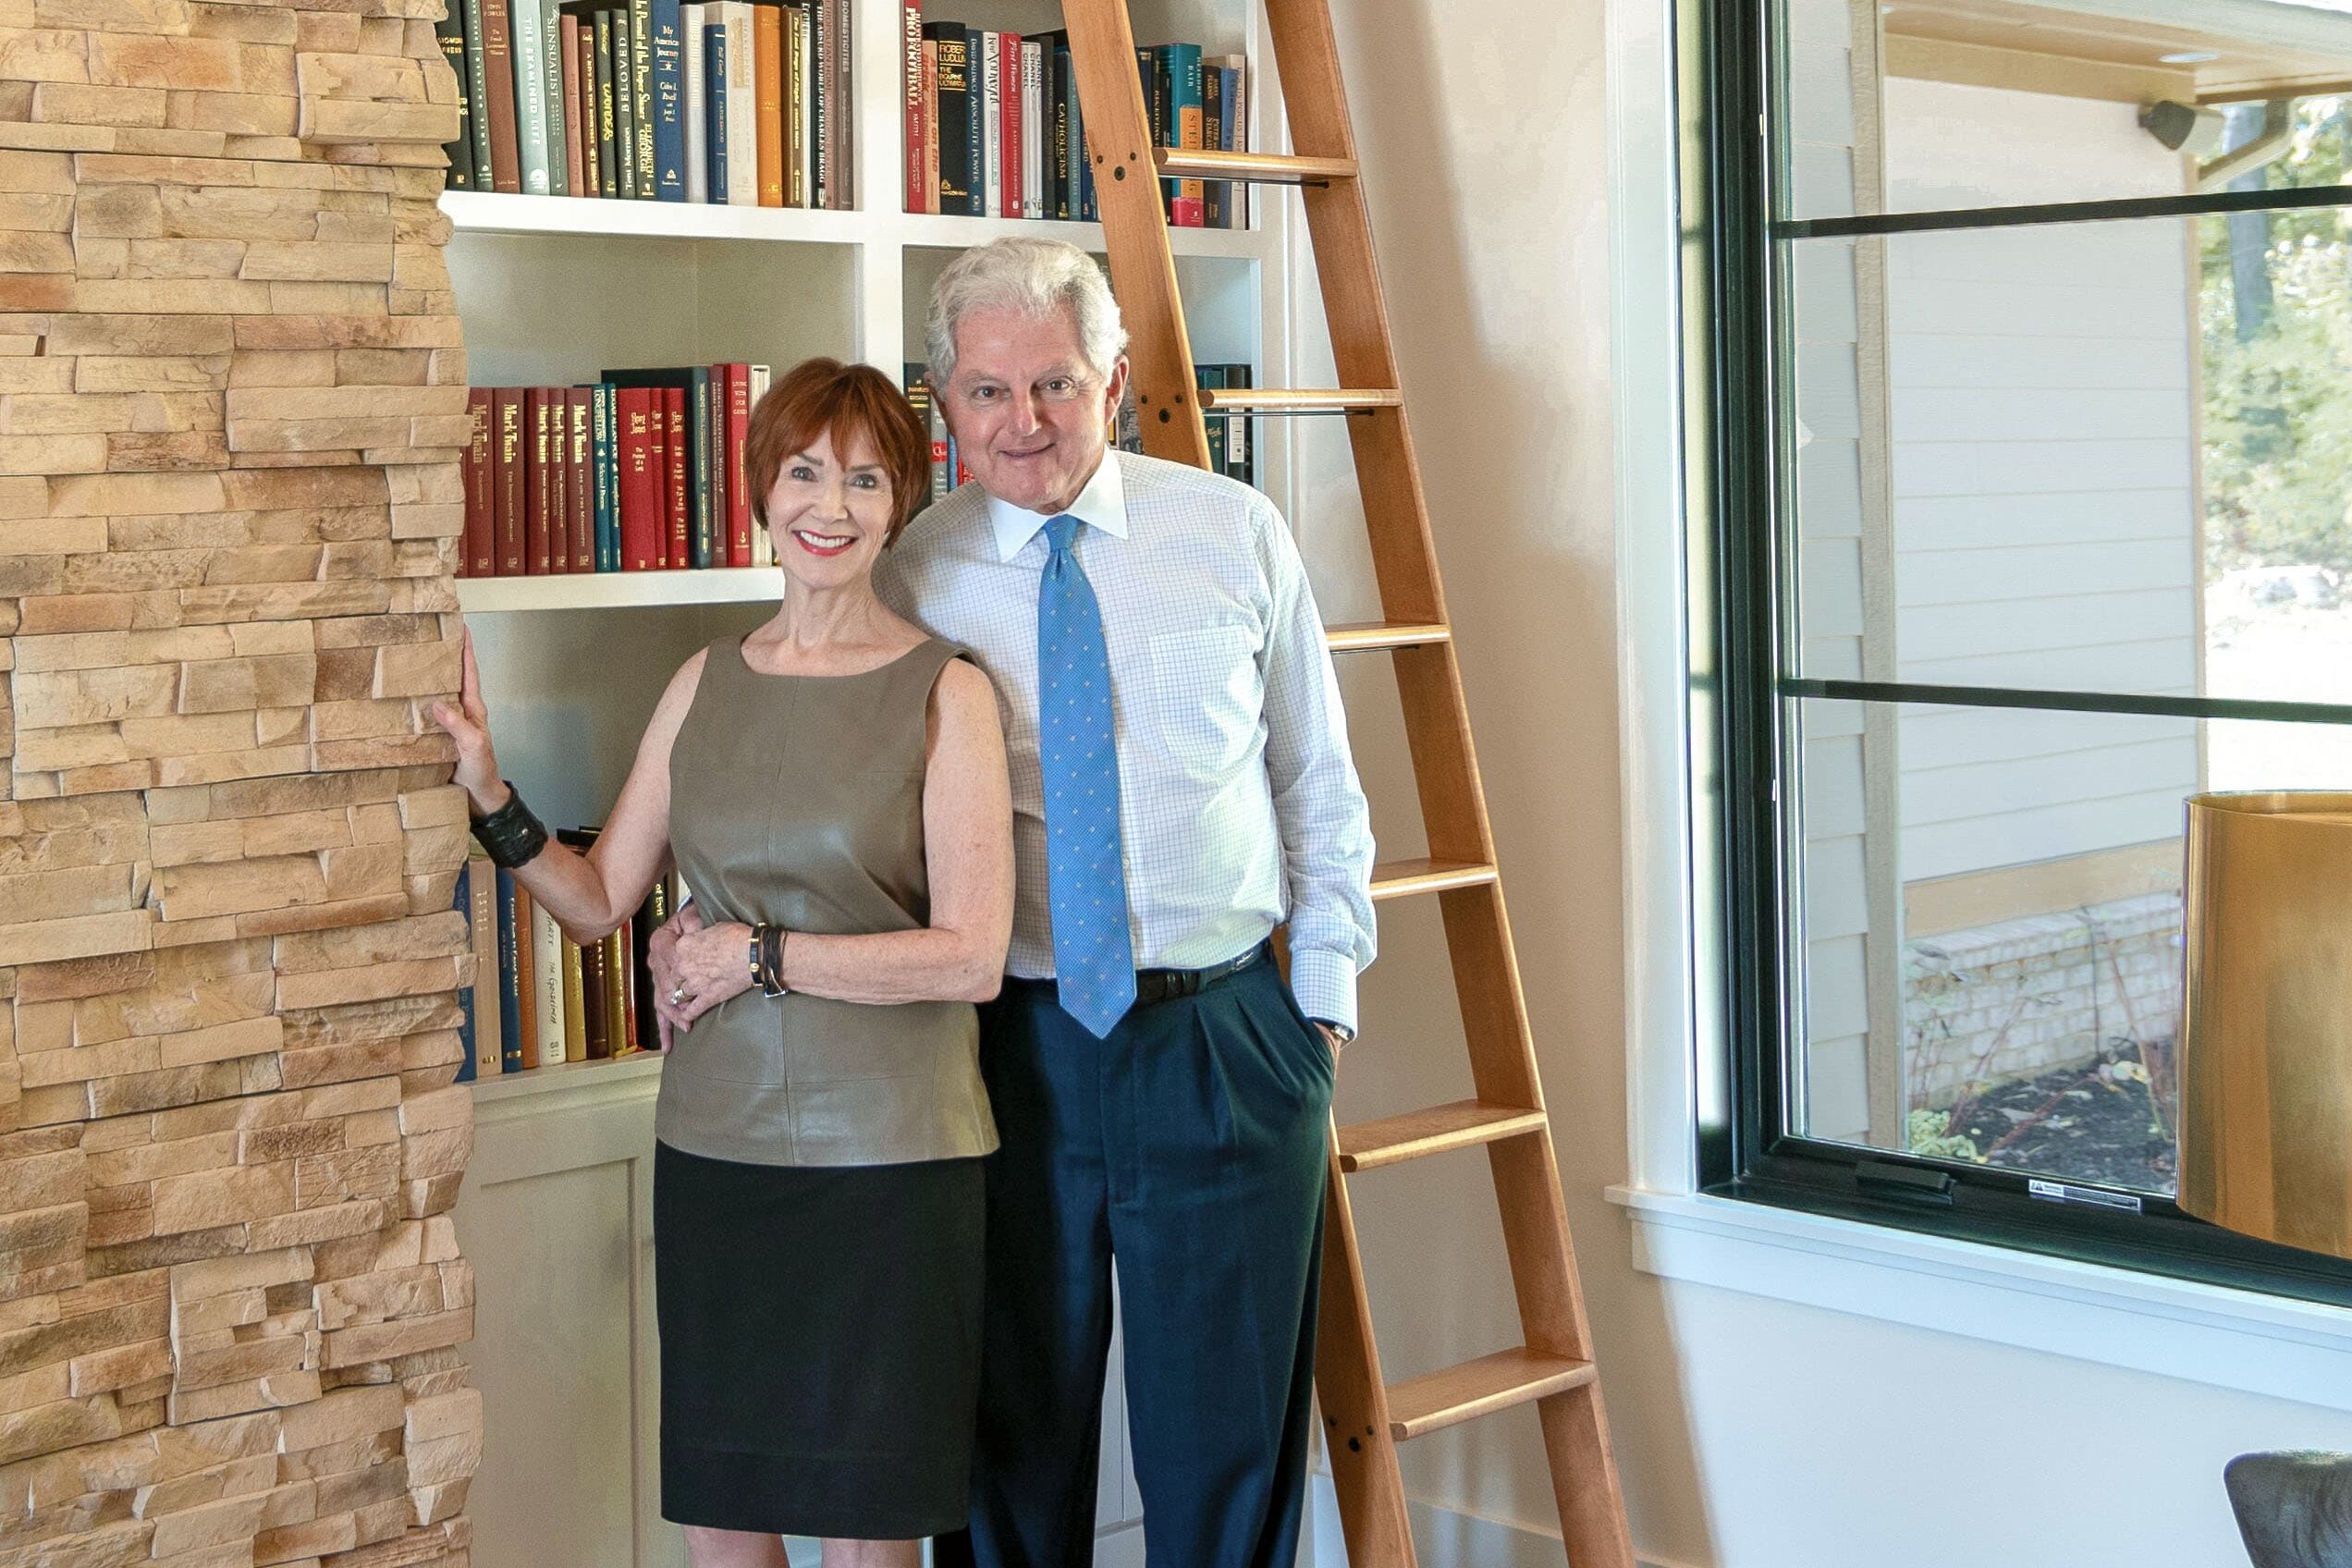 A man and woman standing next to a bookcase.